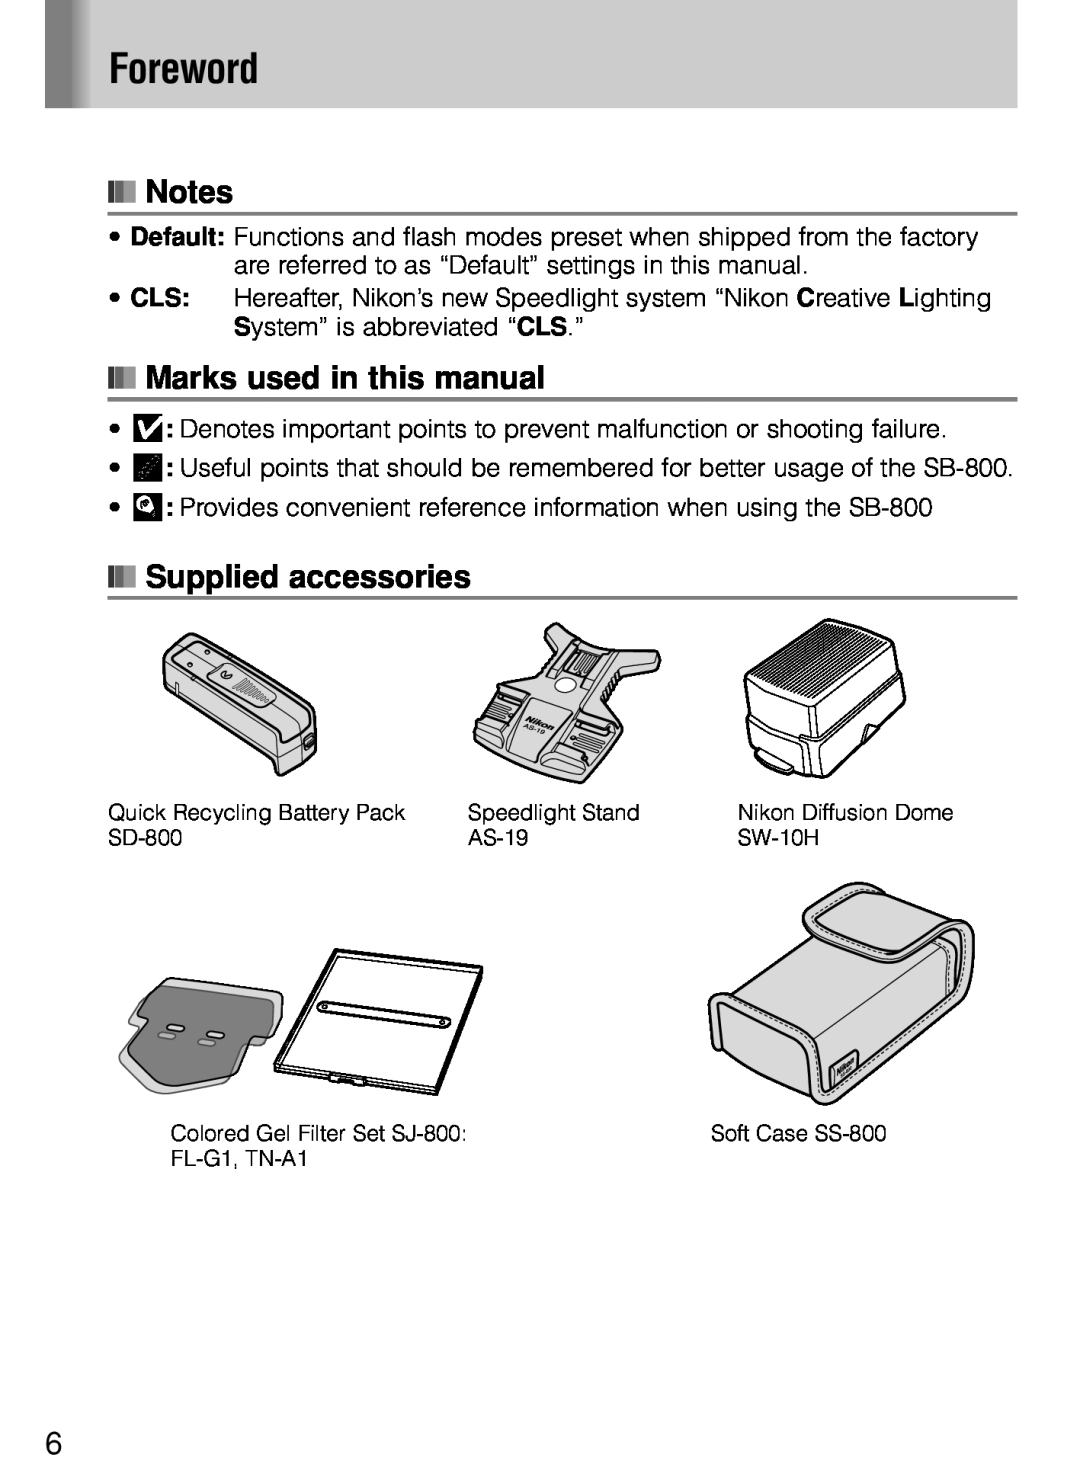 Nikon SB-800 instruction manual Foreword, Marks used in this manual, Supplied accessories 